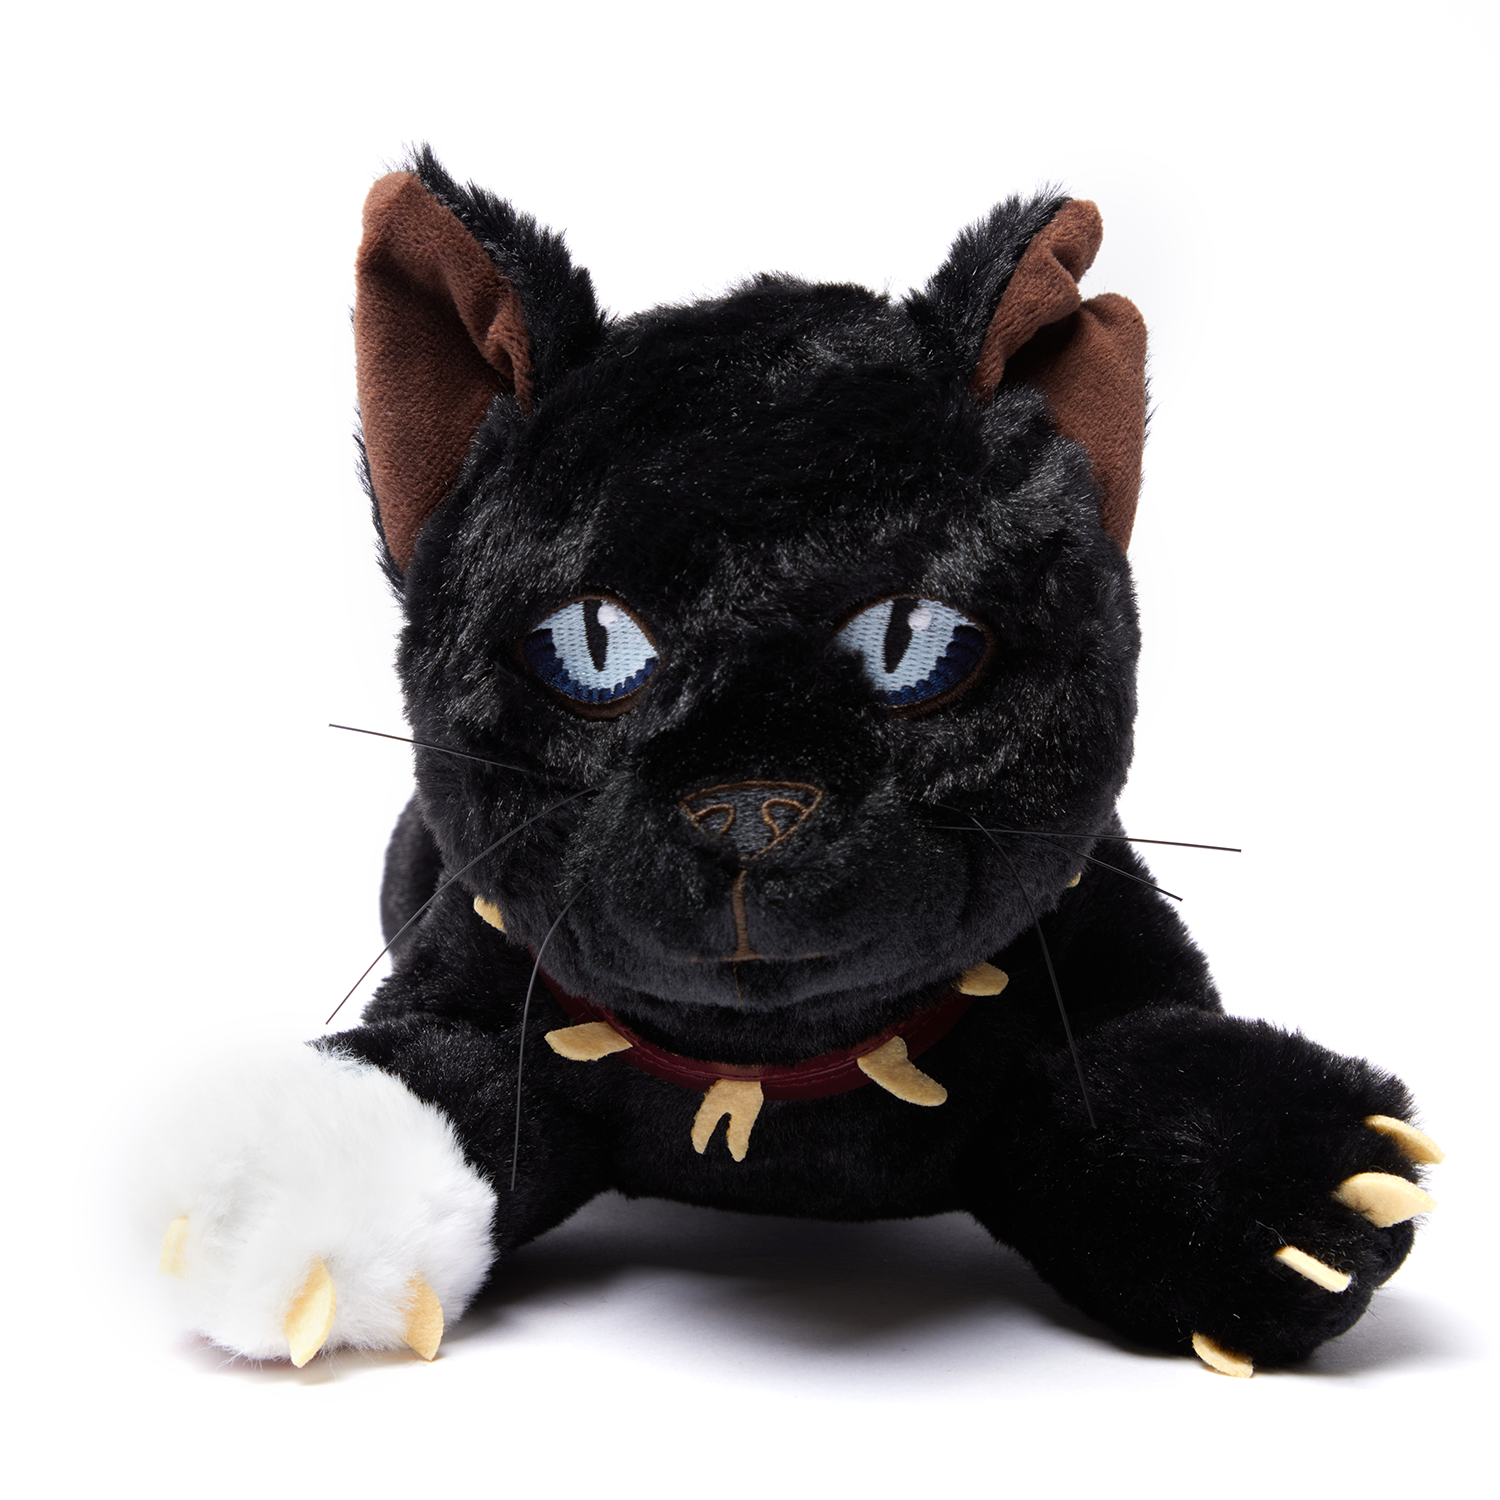 New in store: Special edition Scourge plush